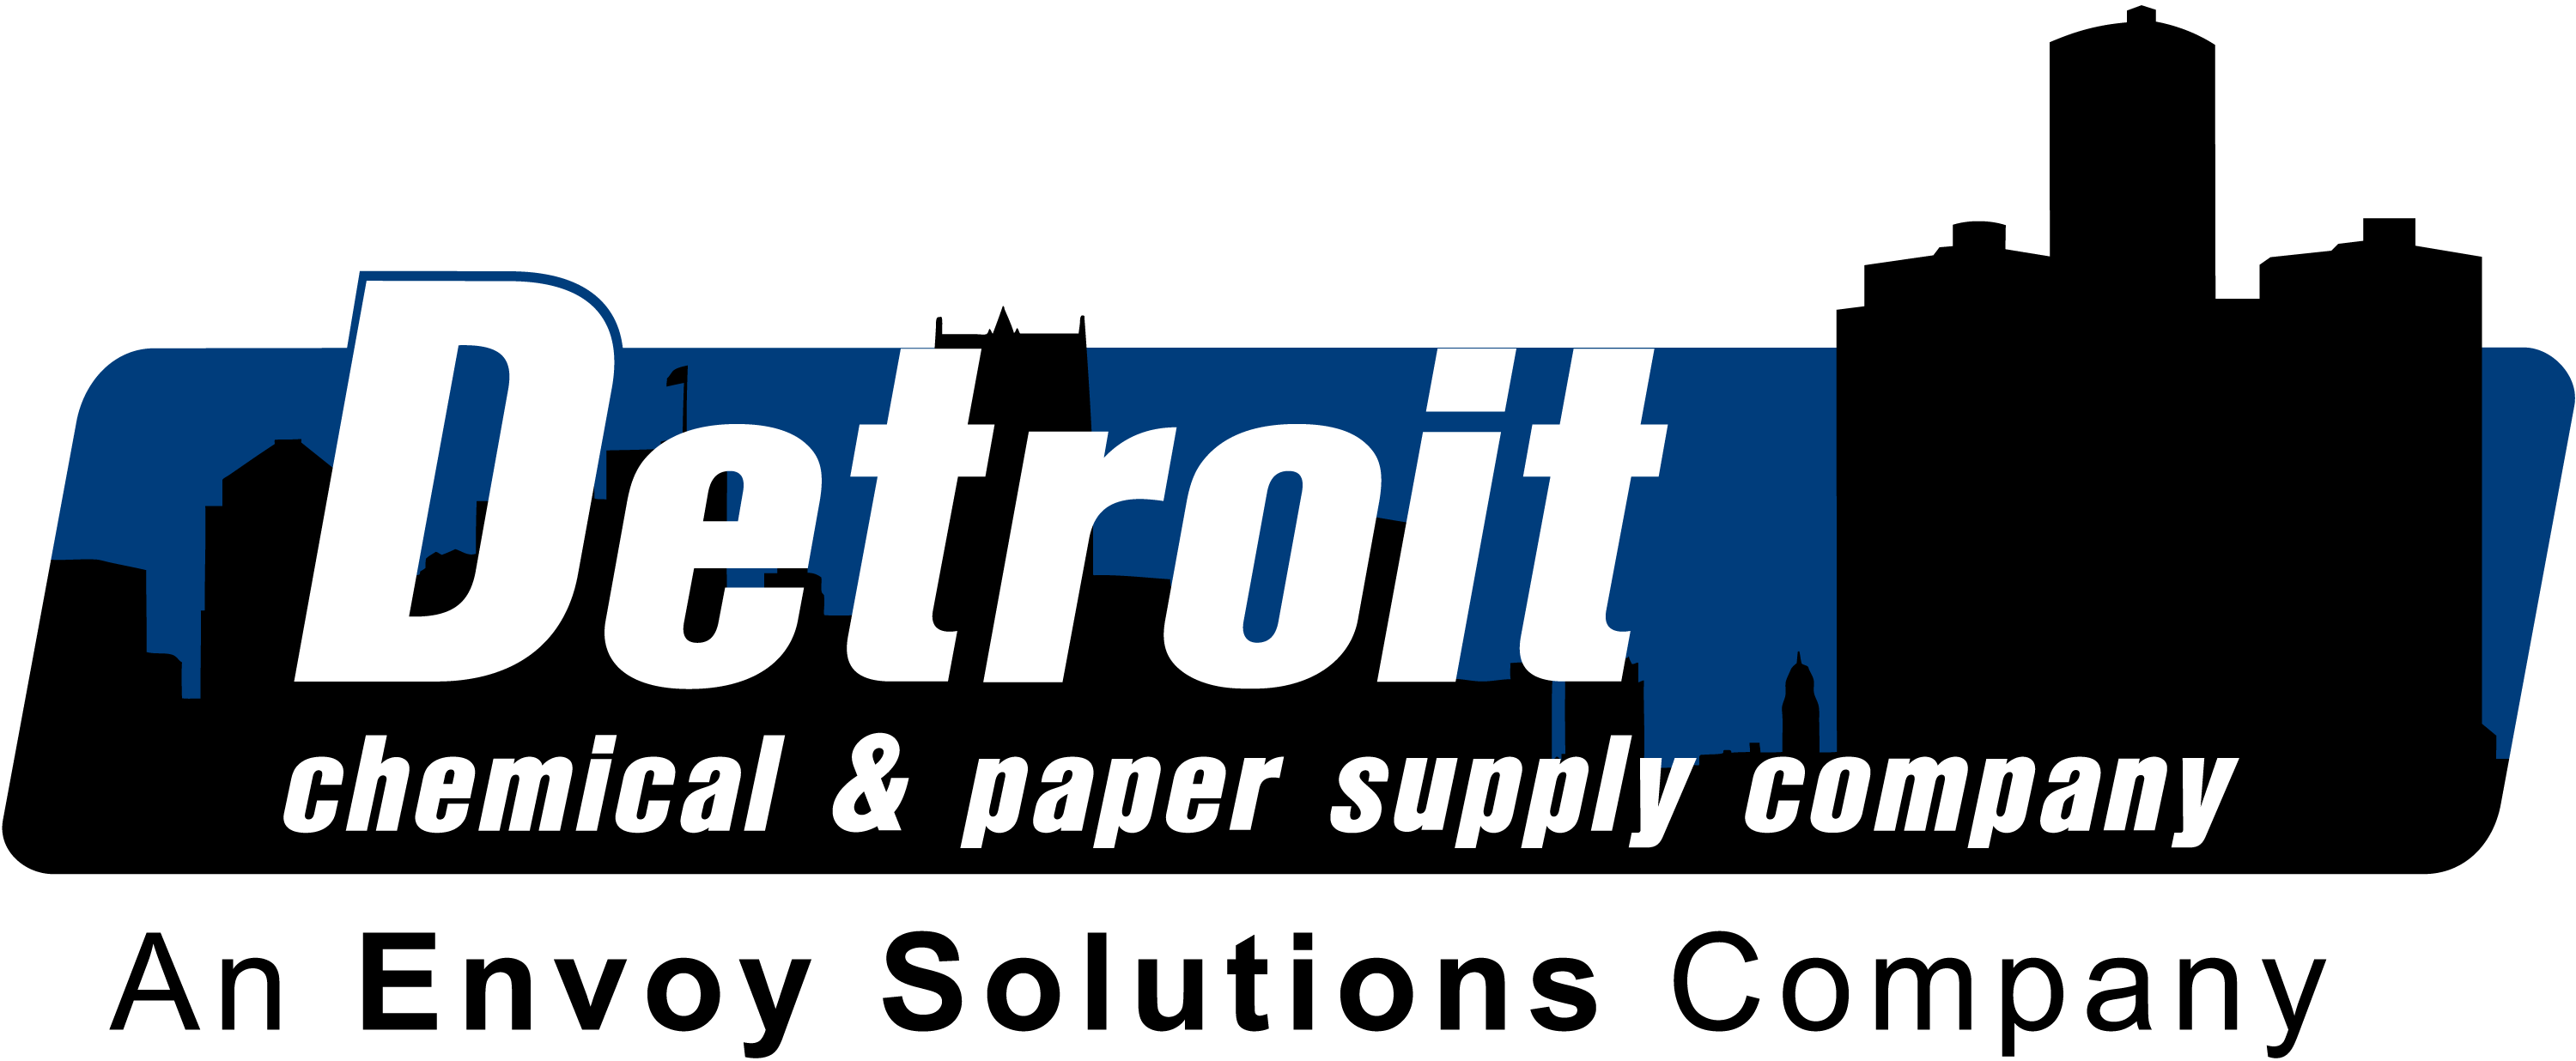 Detroit Chemical & Paper Supply Company